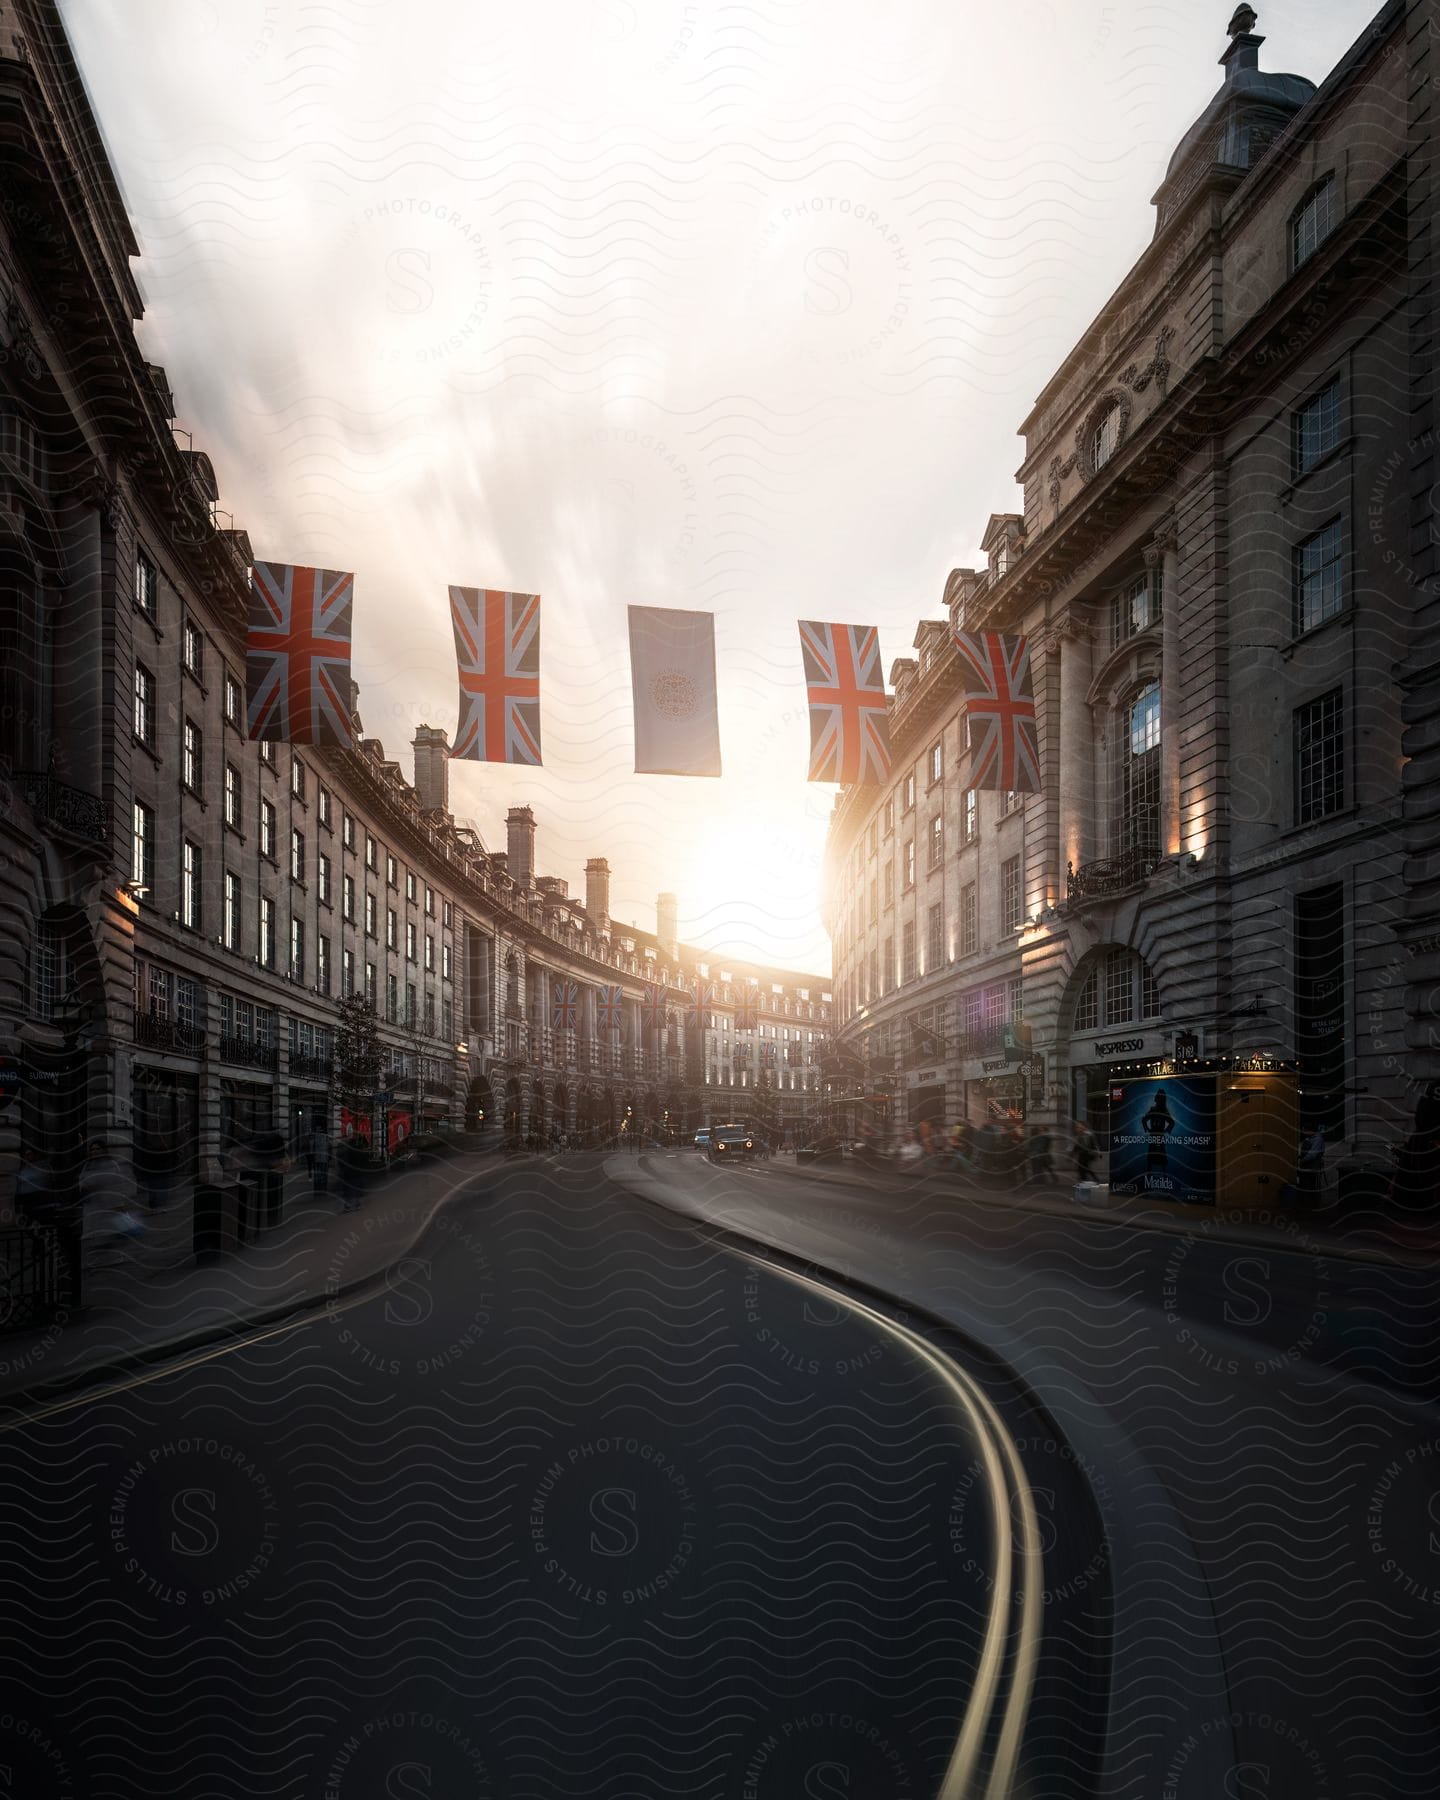 An English city street with Union Jack flags strung across it from building to building.